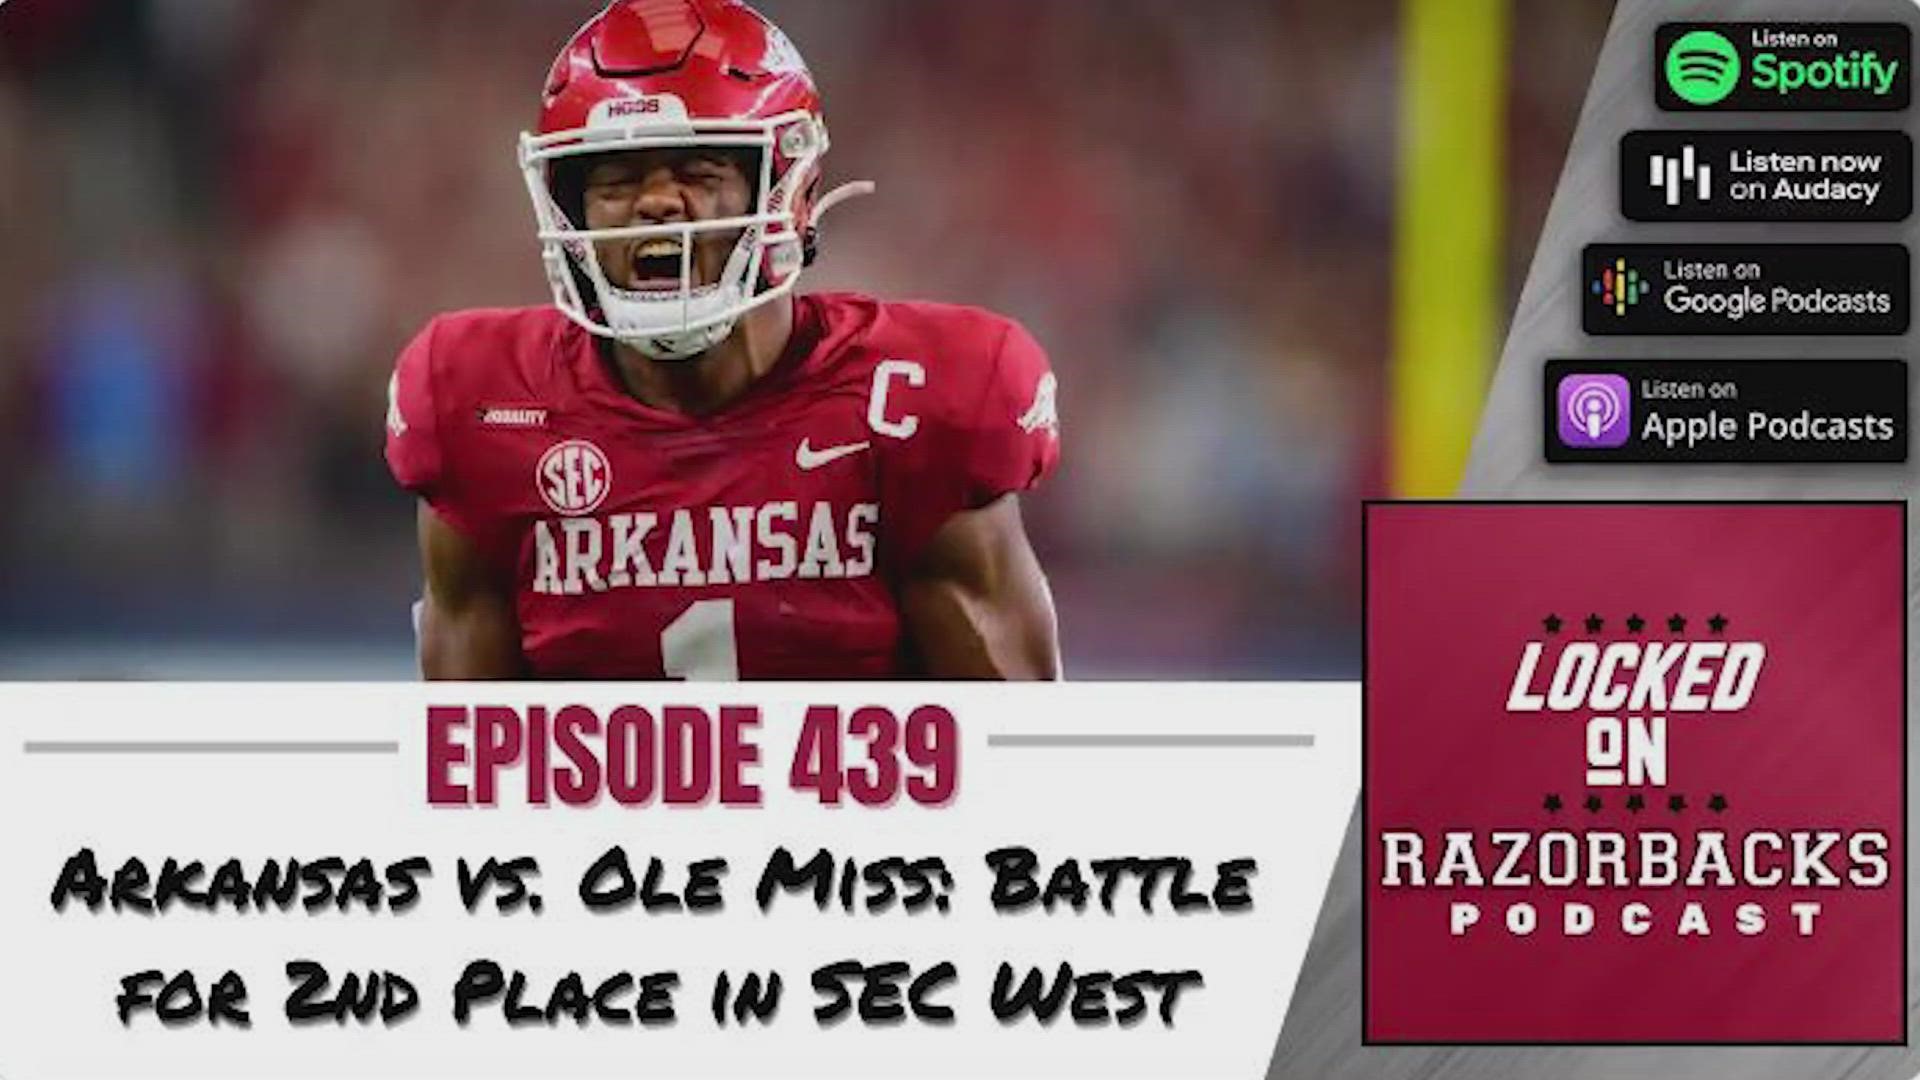 This week, Arkansas will face off against Ole Miss in the battle for 2nd place in the SEC West.